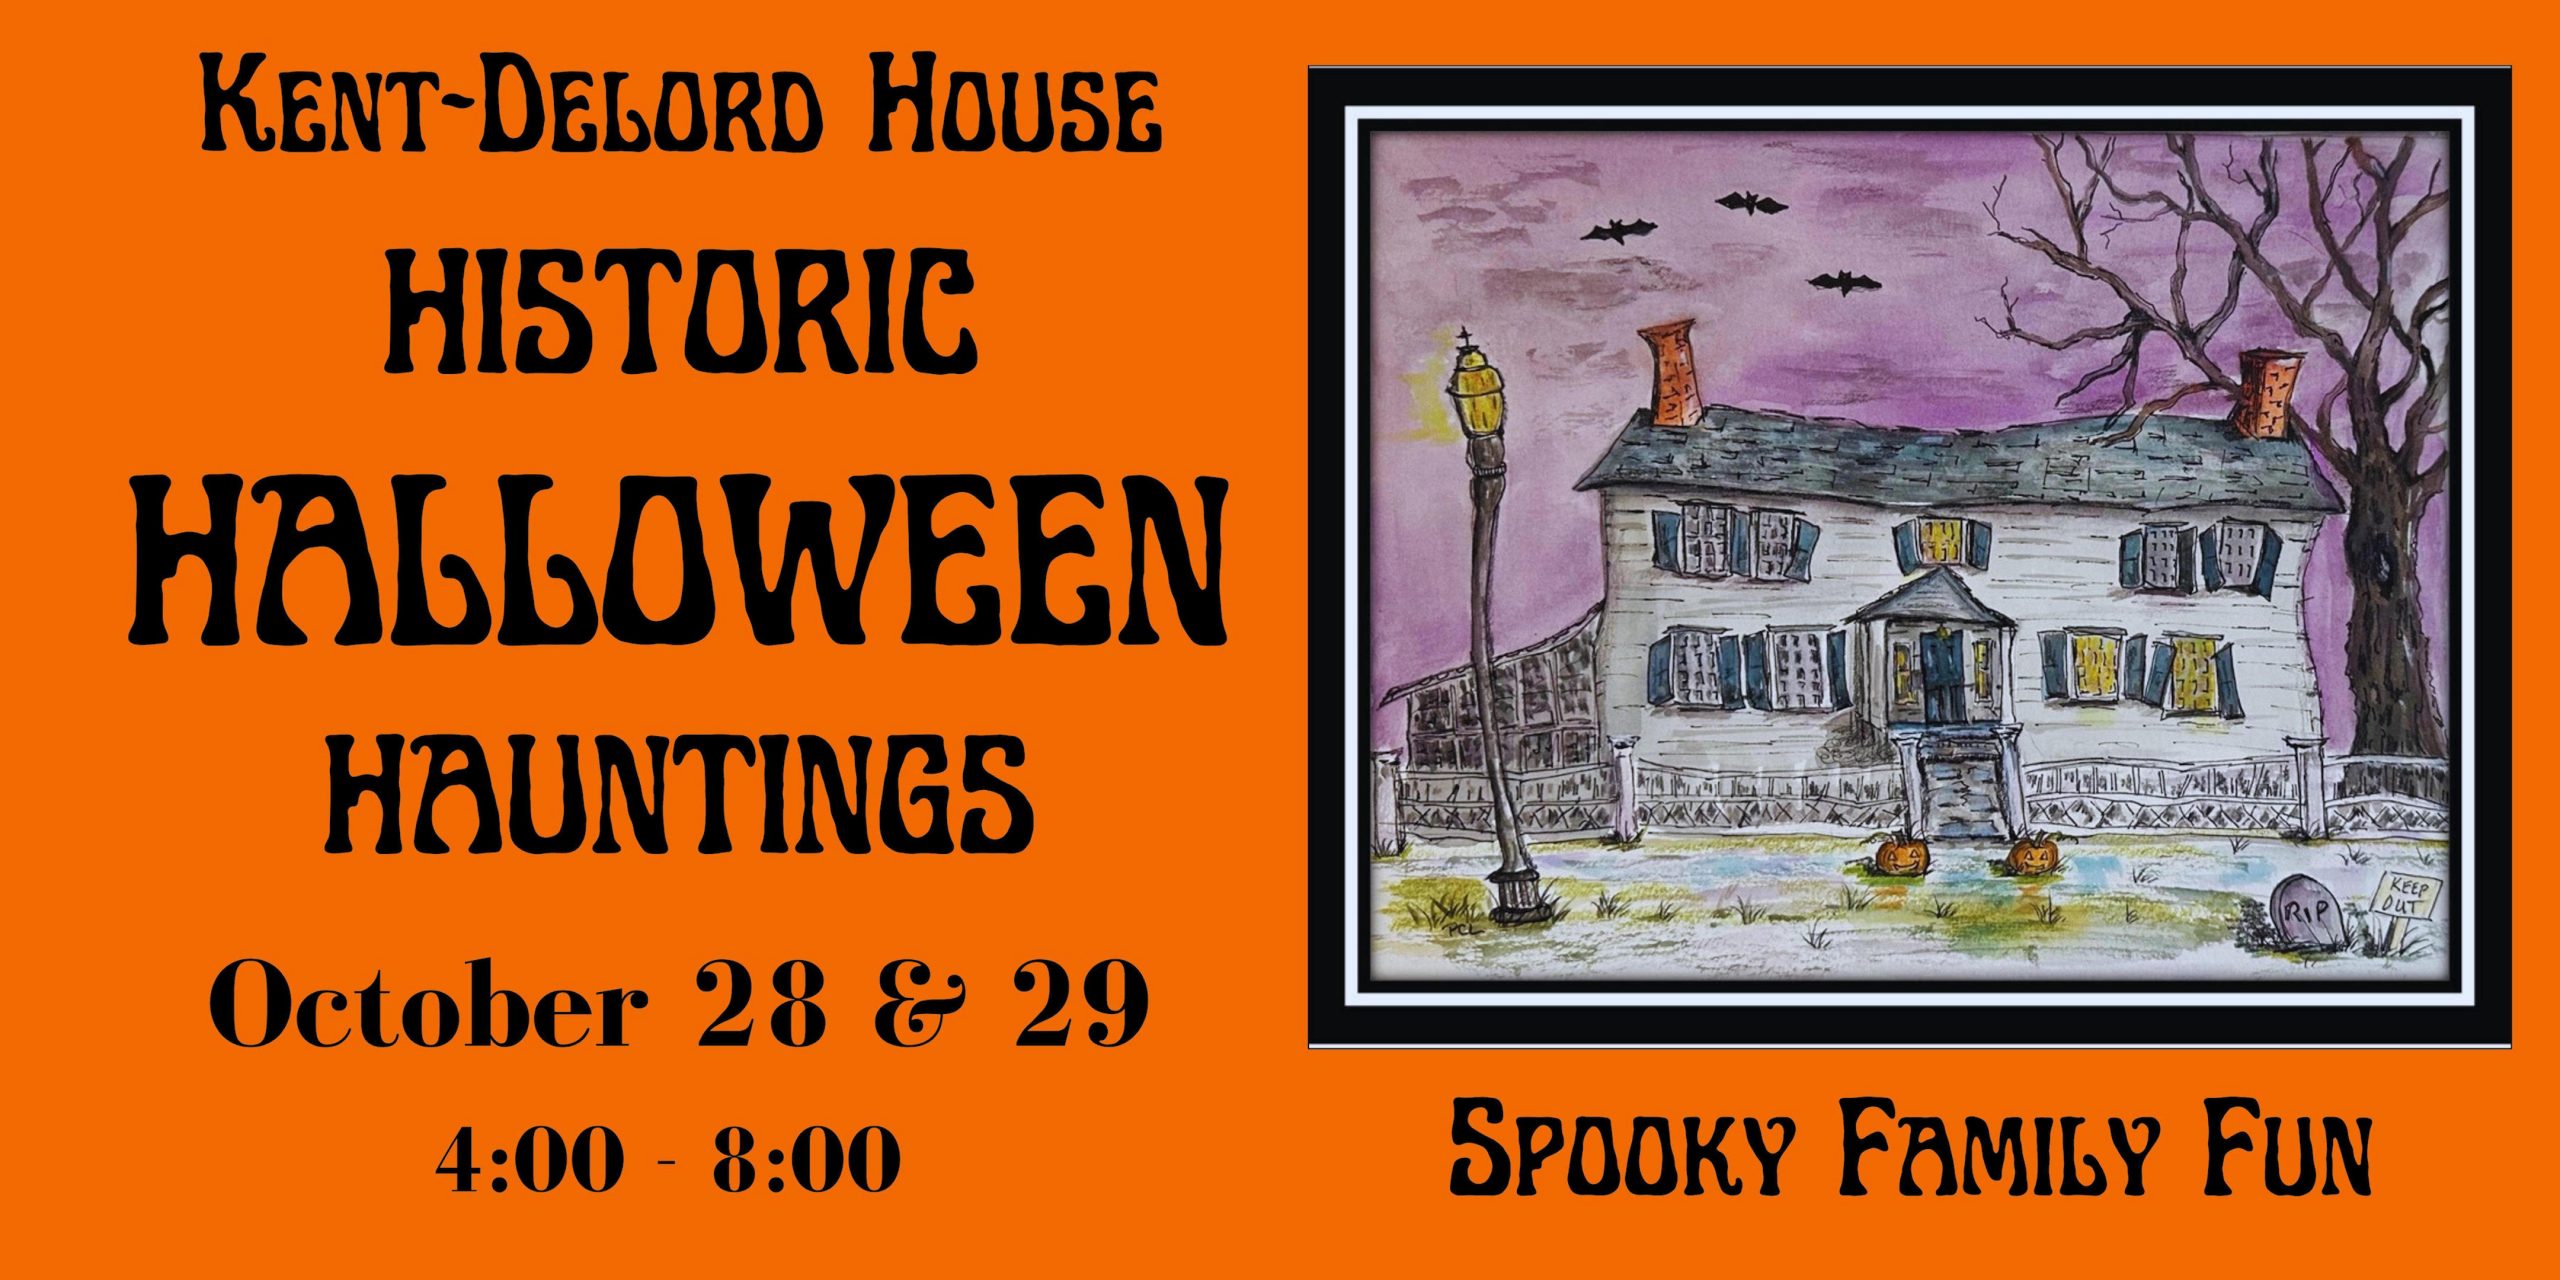 Event Poster for Historic Halloween, from Oct 28-29th from 4-8pm